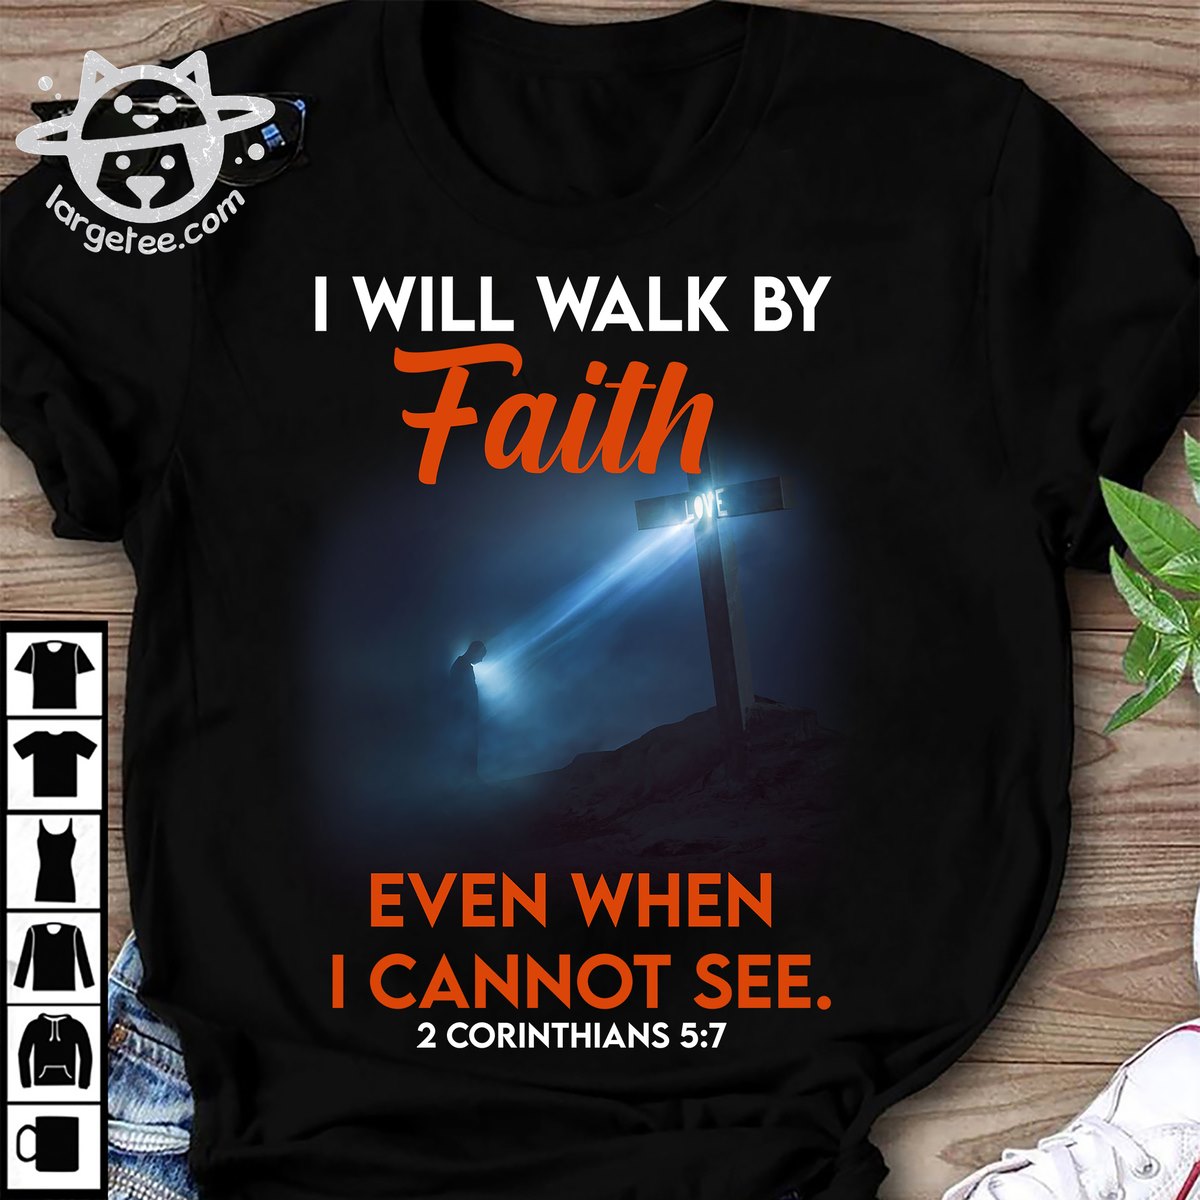 I will walk by Faith even when I cannot see - God's cross